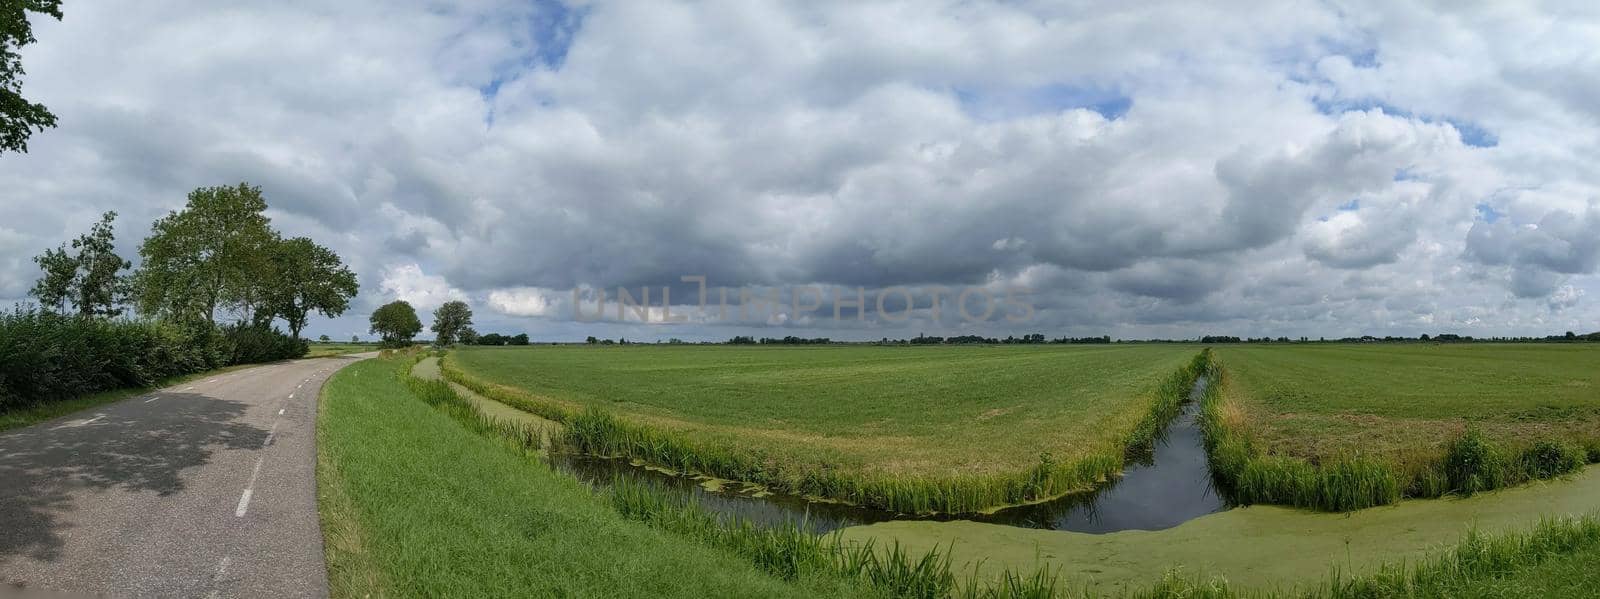 Cloudy Frisian panoramic landscape  by traveltelly